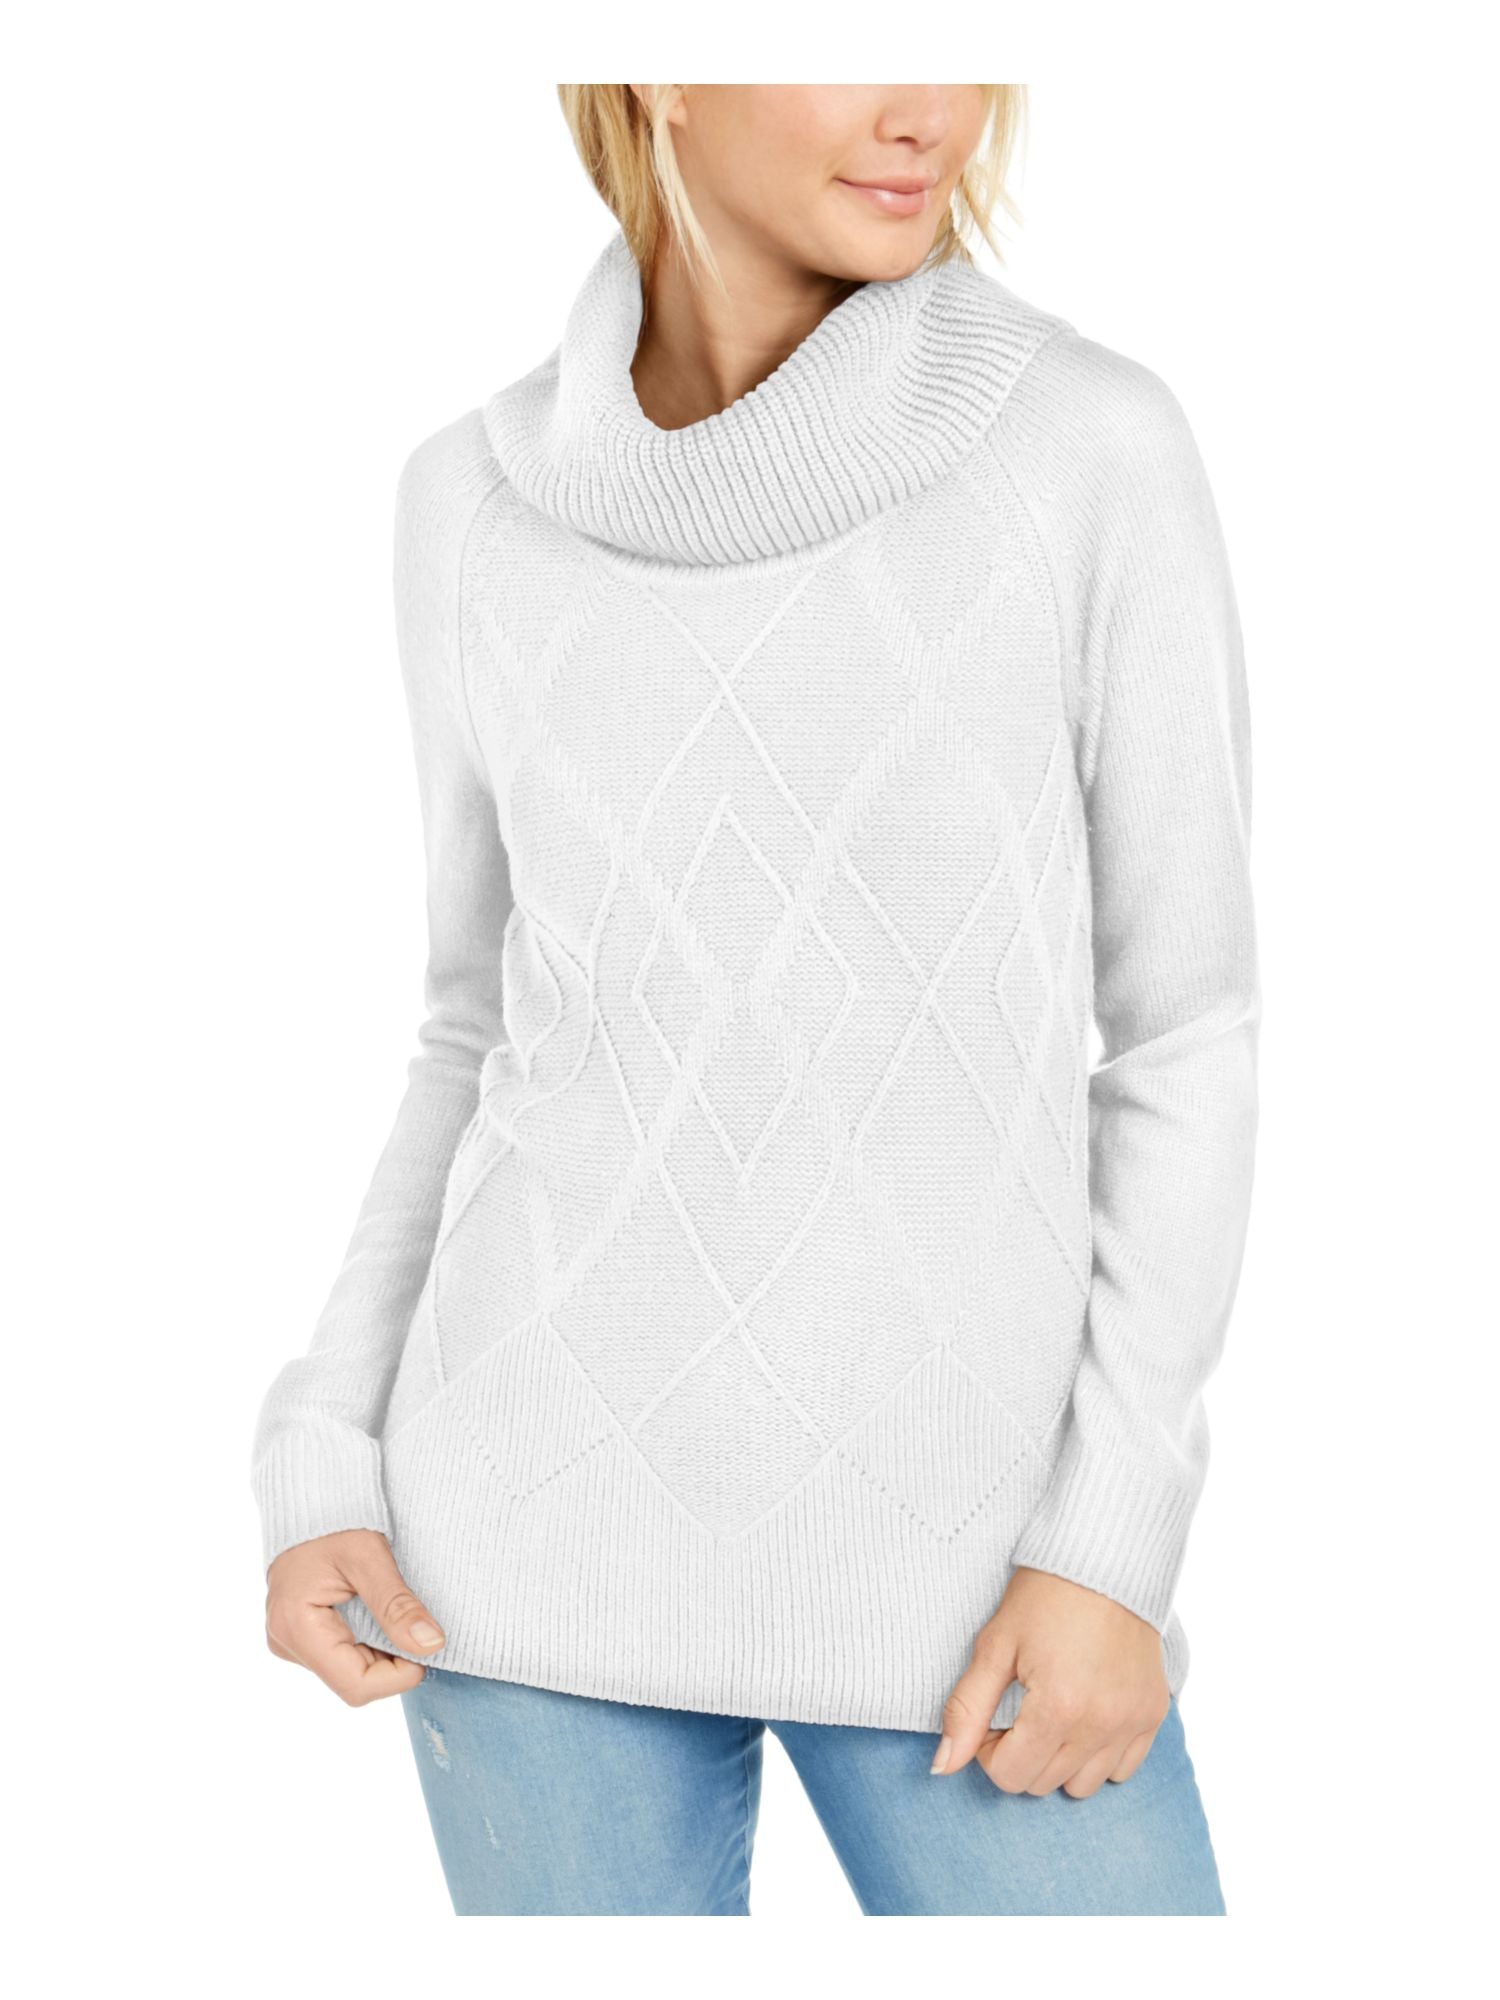 Tommy Hilfiger Women's Long Sleeve Cowl Neck Sweater White Size X-Small